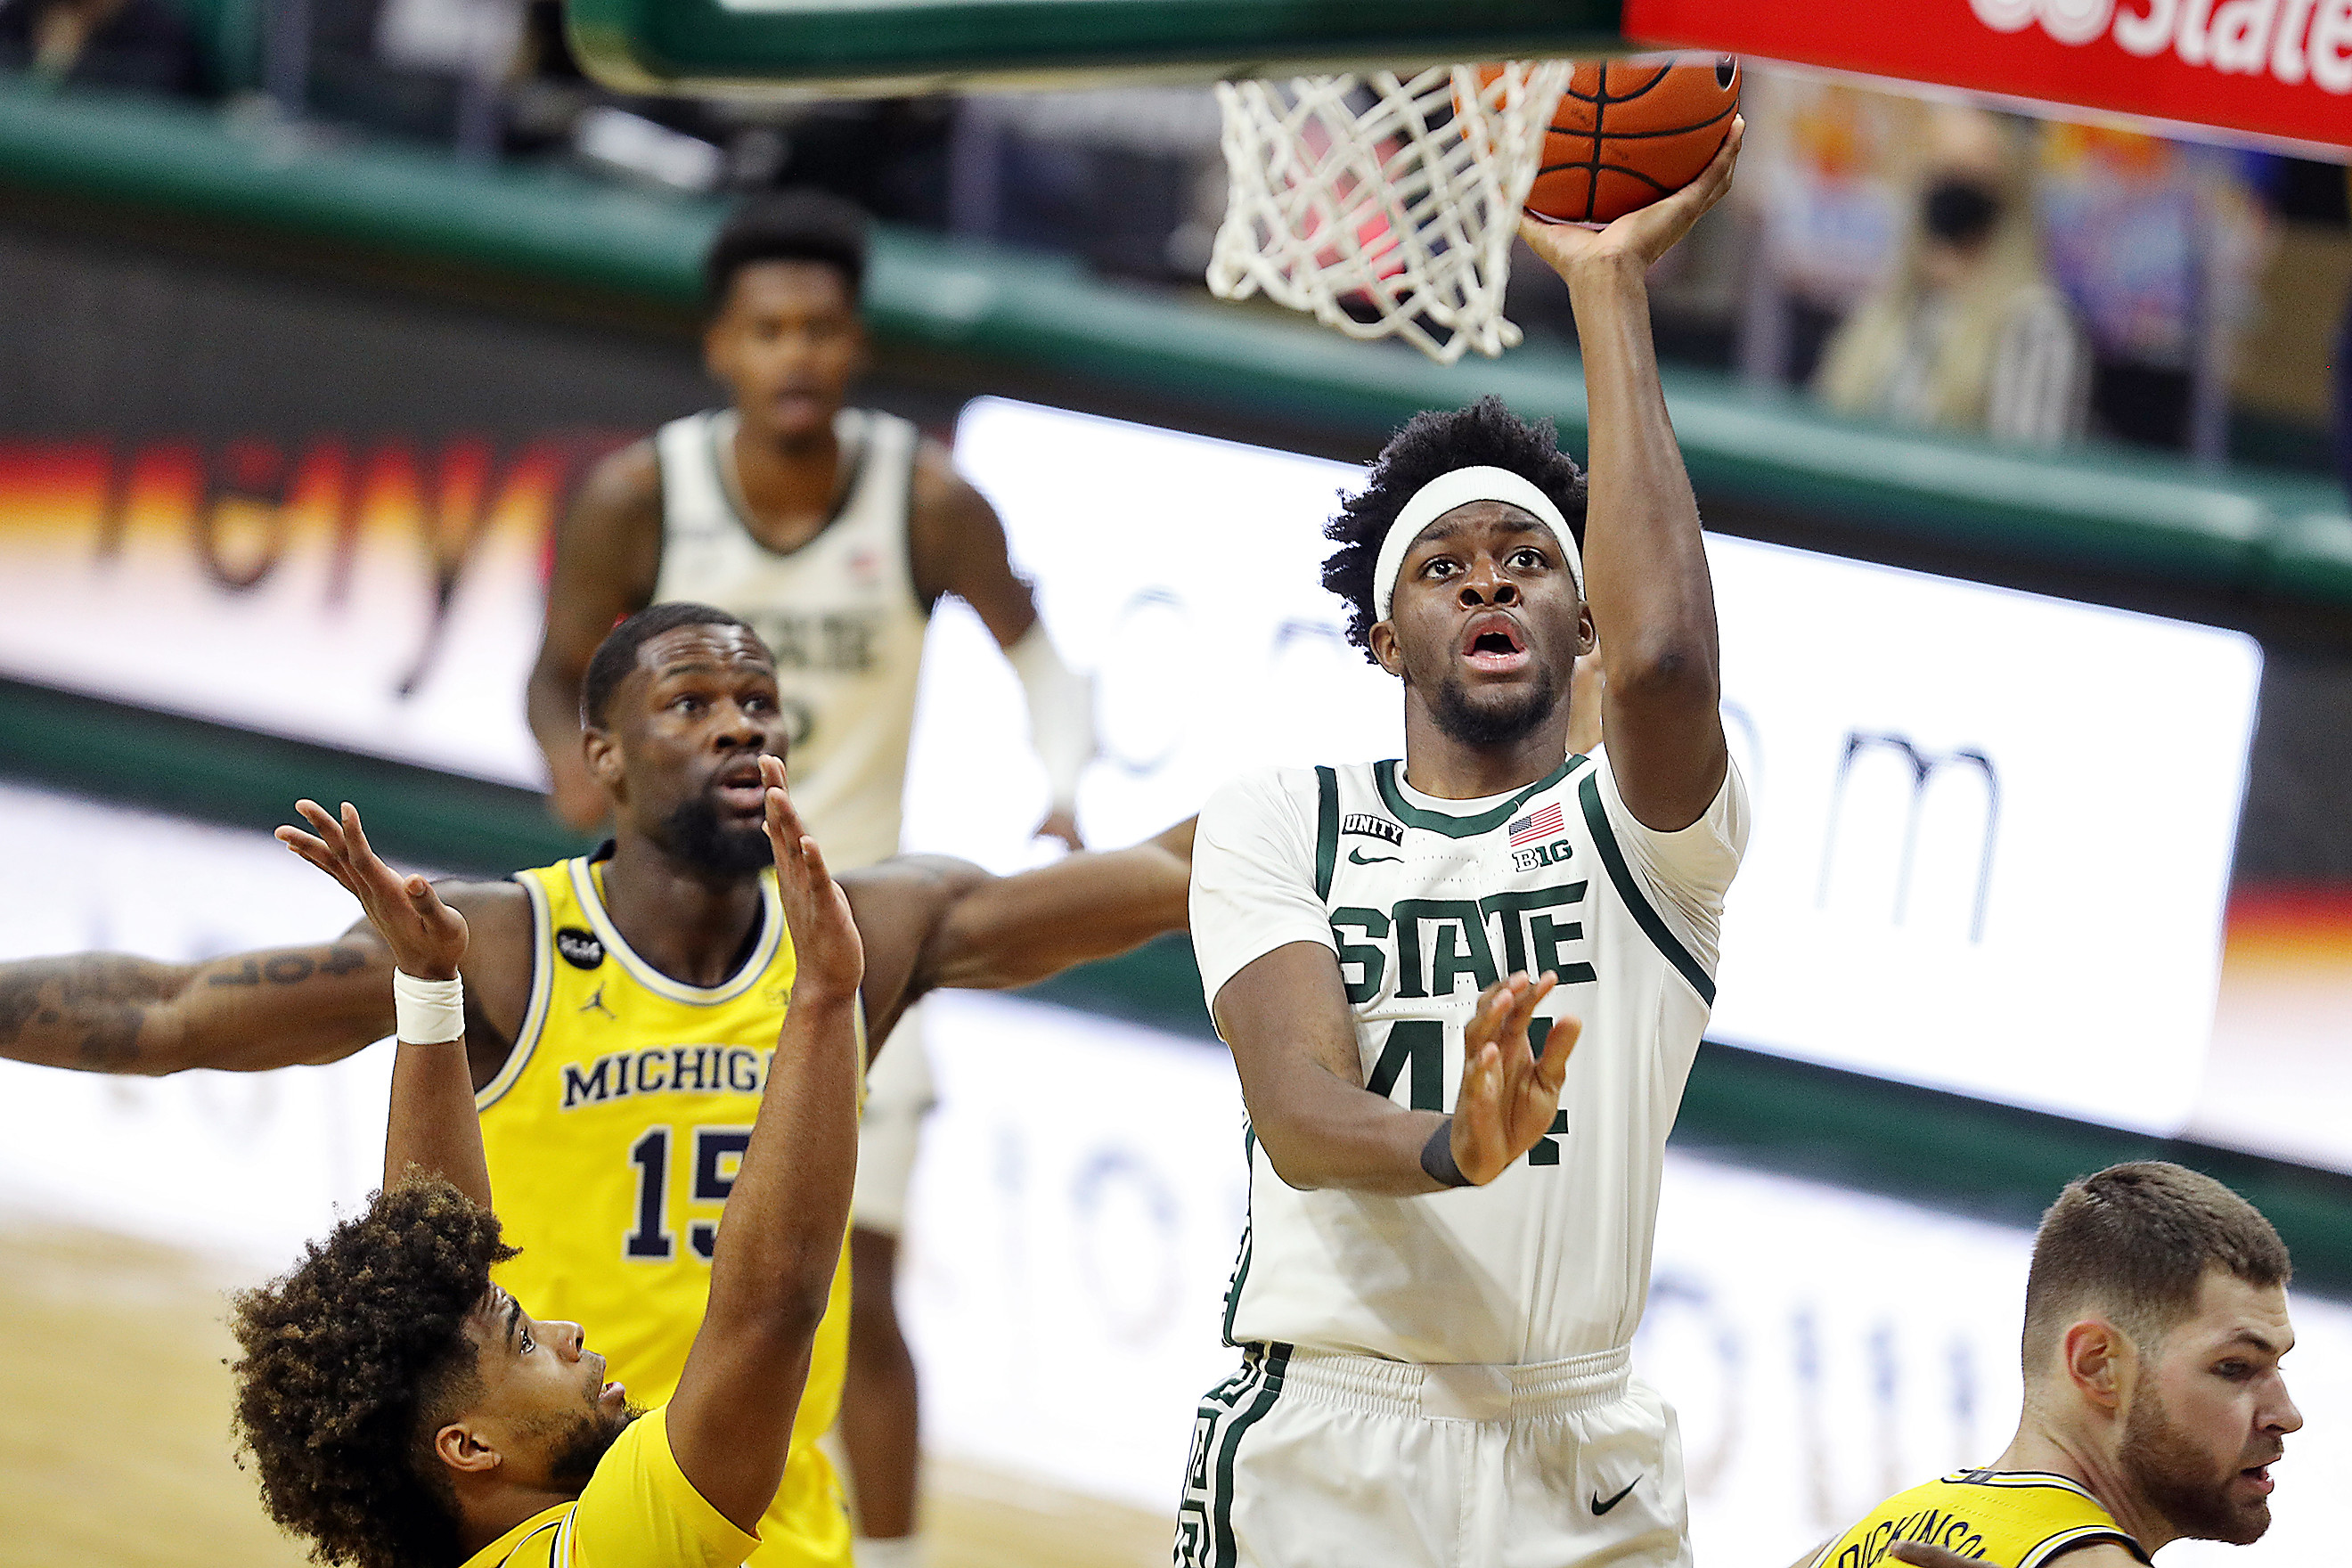 Msu Basketball Schedule 2022 2023 What We Know About Michigan State's Schedule In 2021-22 - Mlive.com